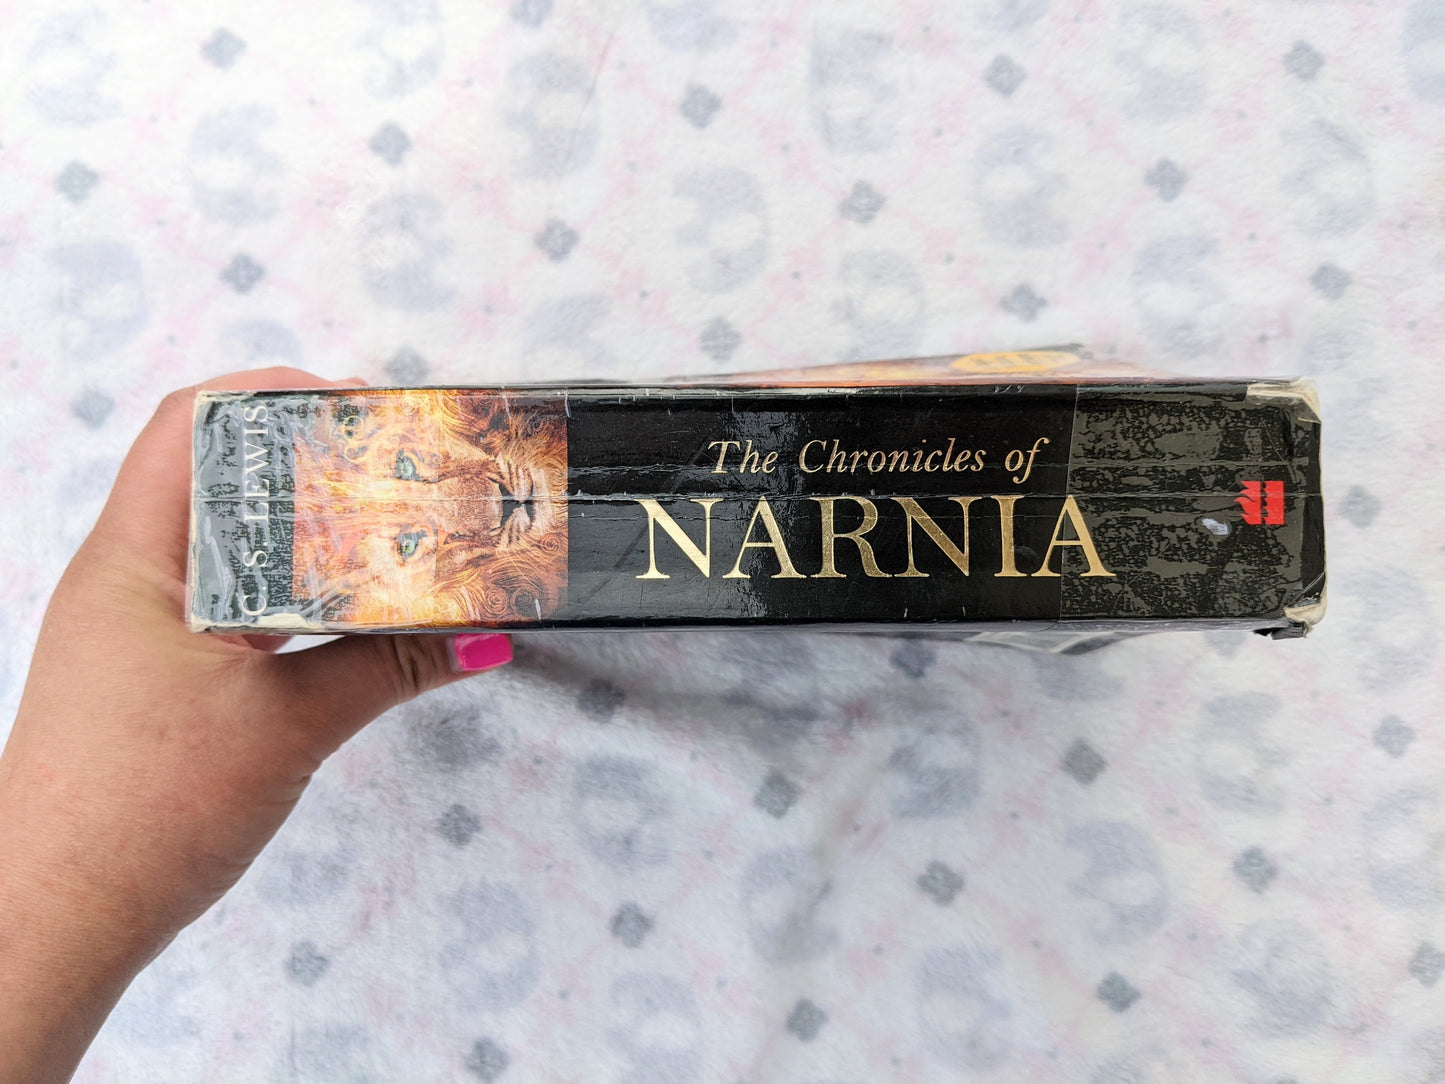 The Chronicles of Narnia by CS Lewis, book